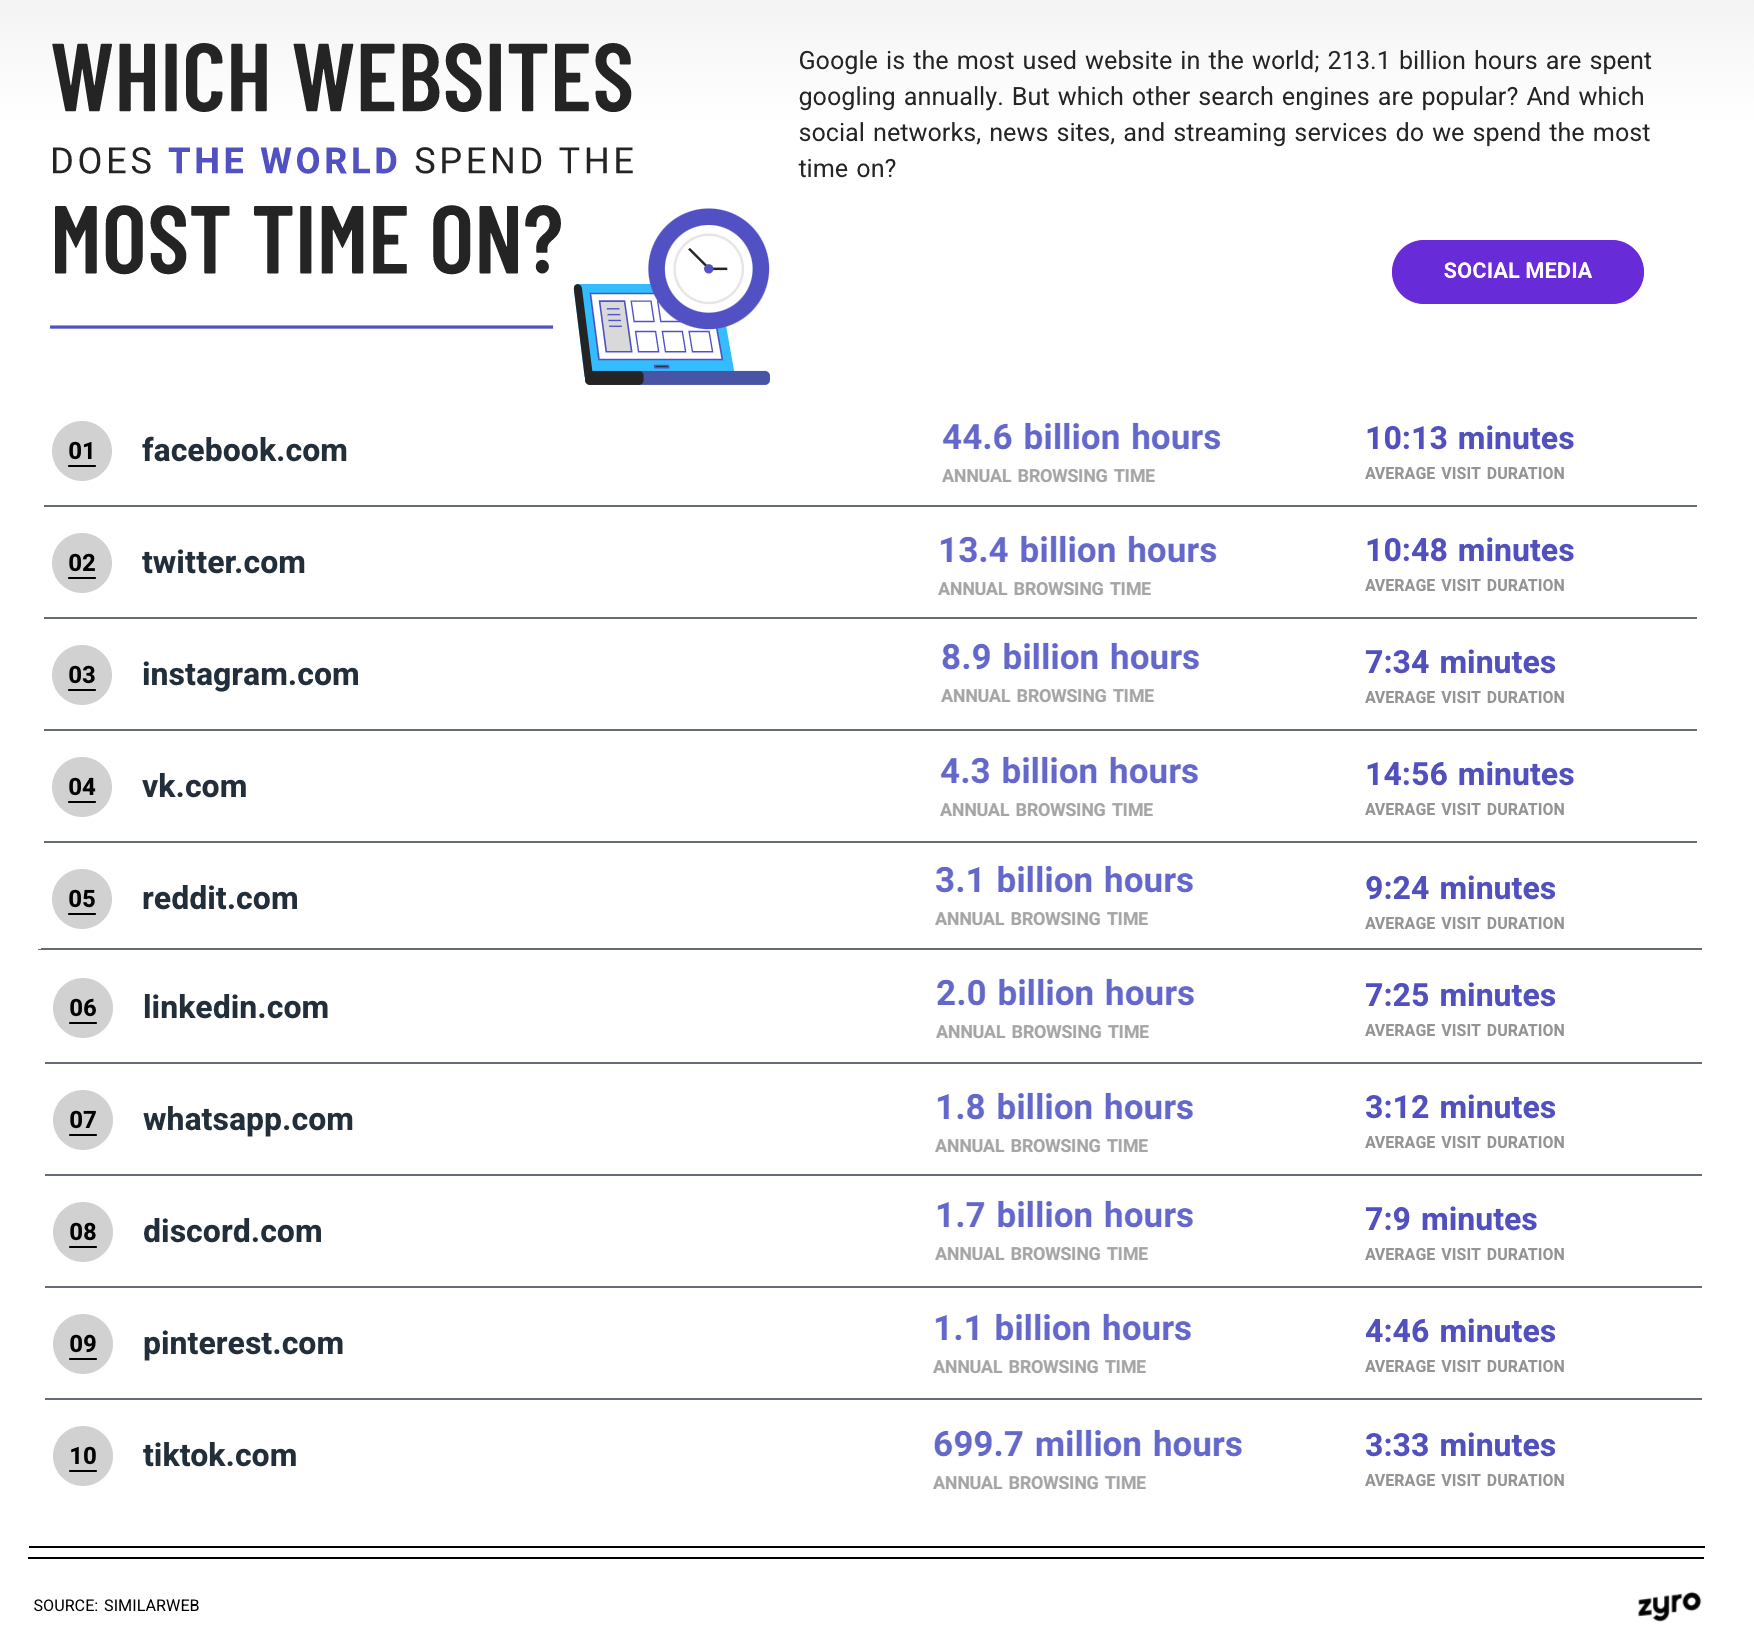 Which Social Media Platforms Does the World Spend the Most Time On?